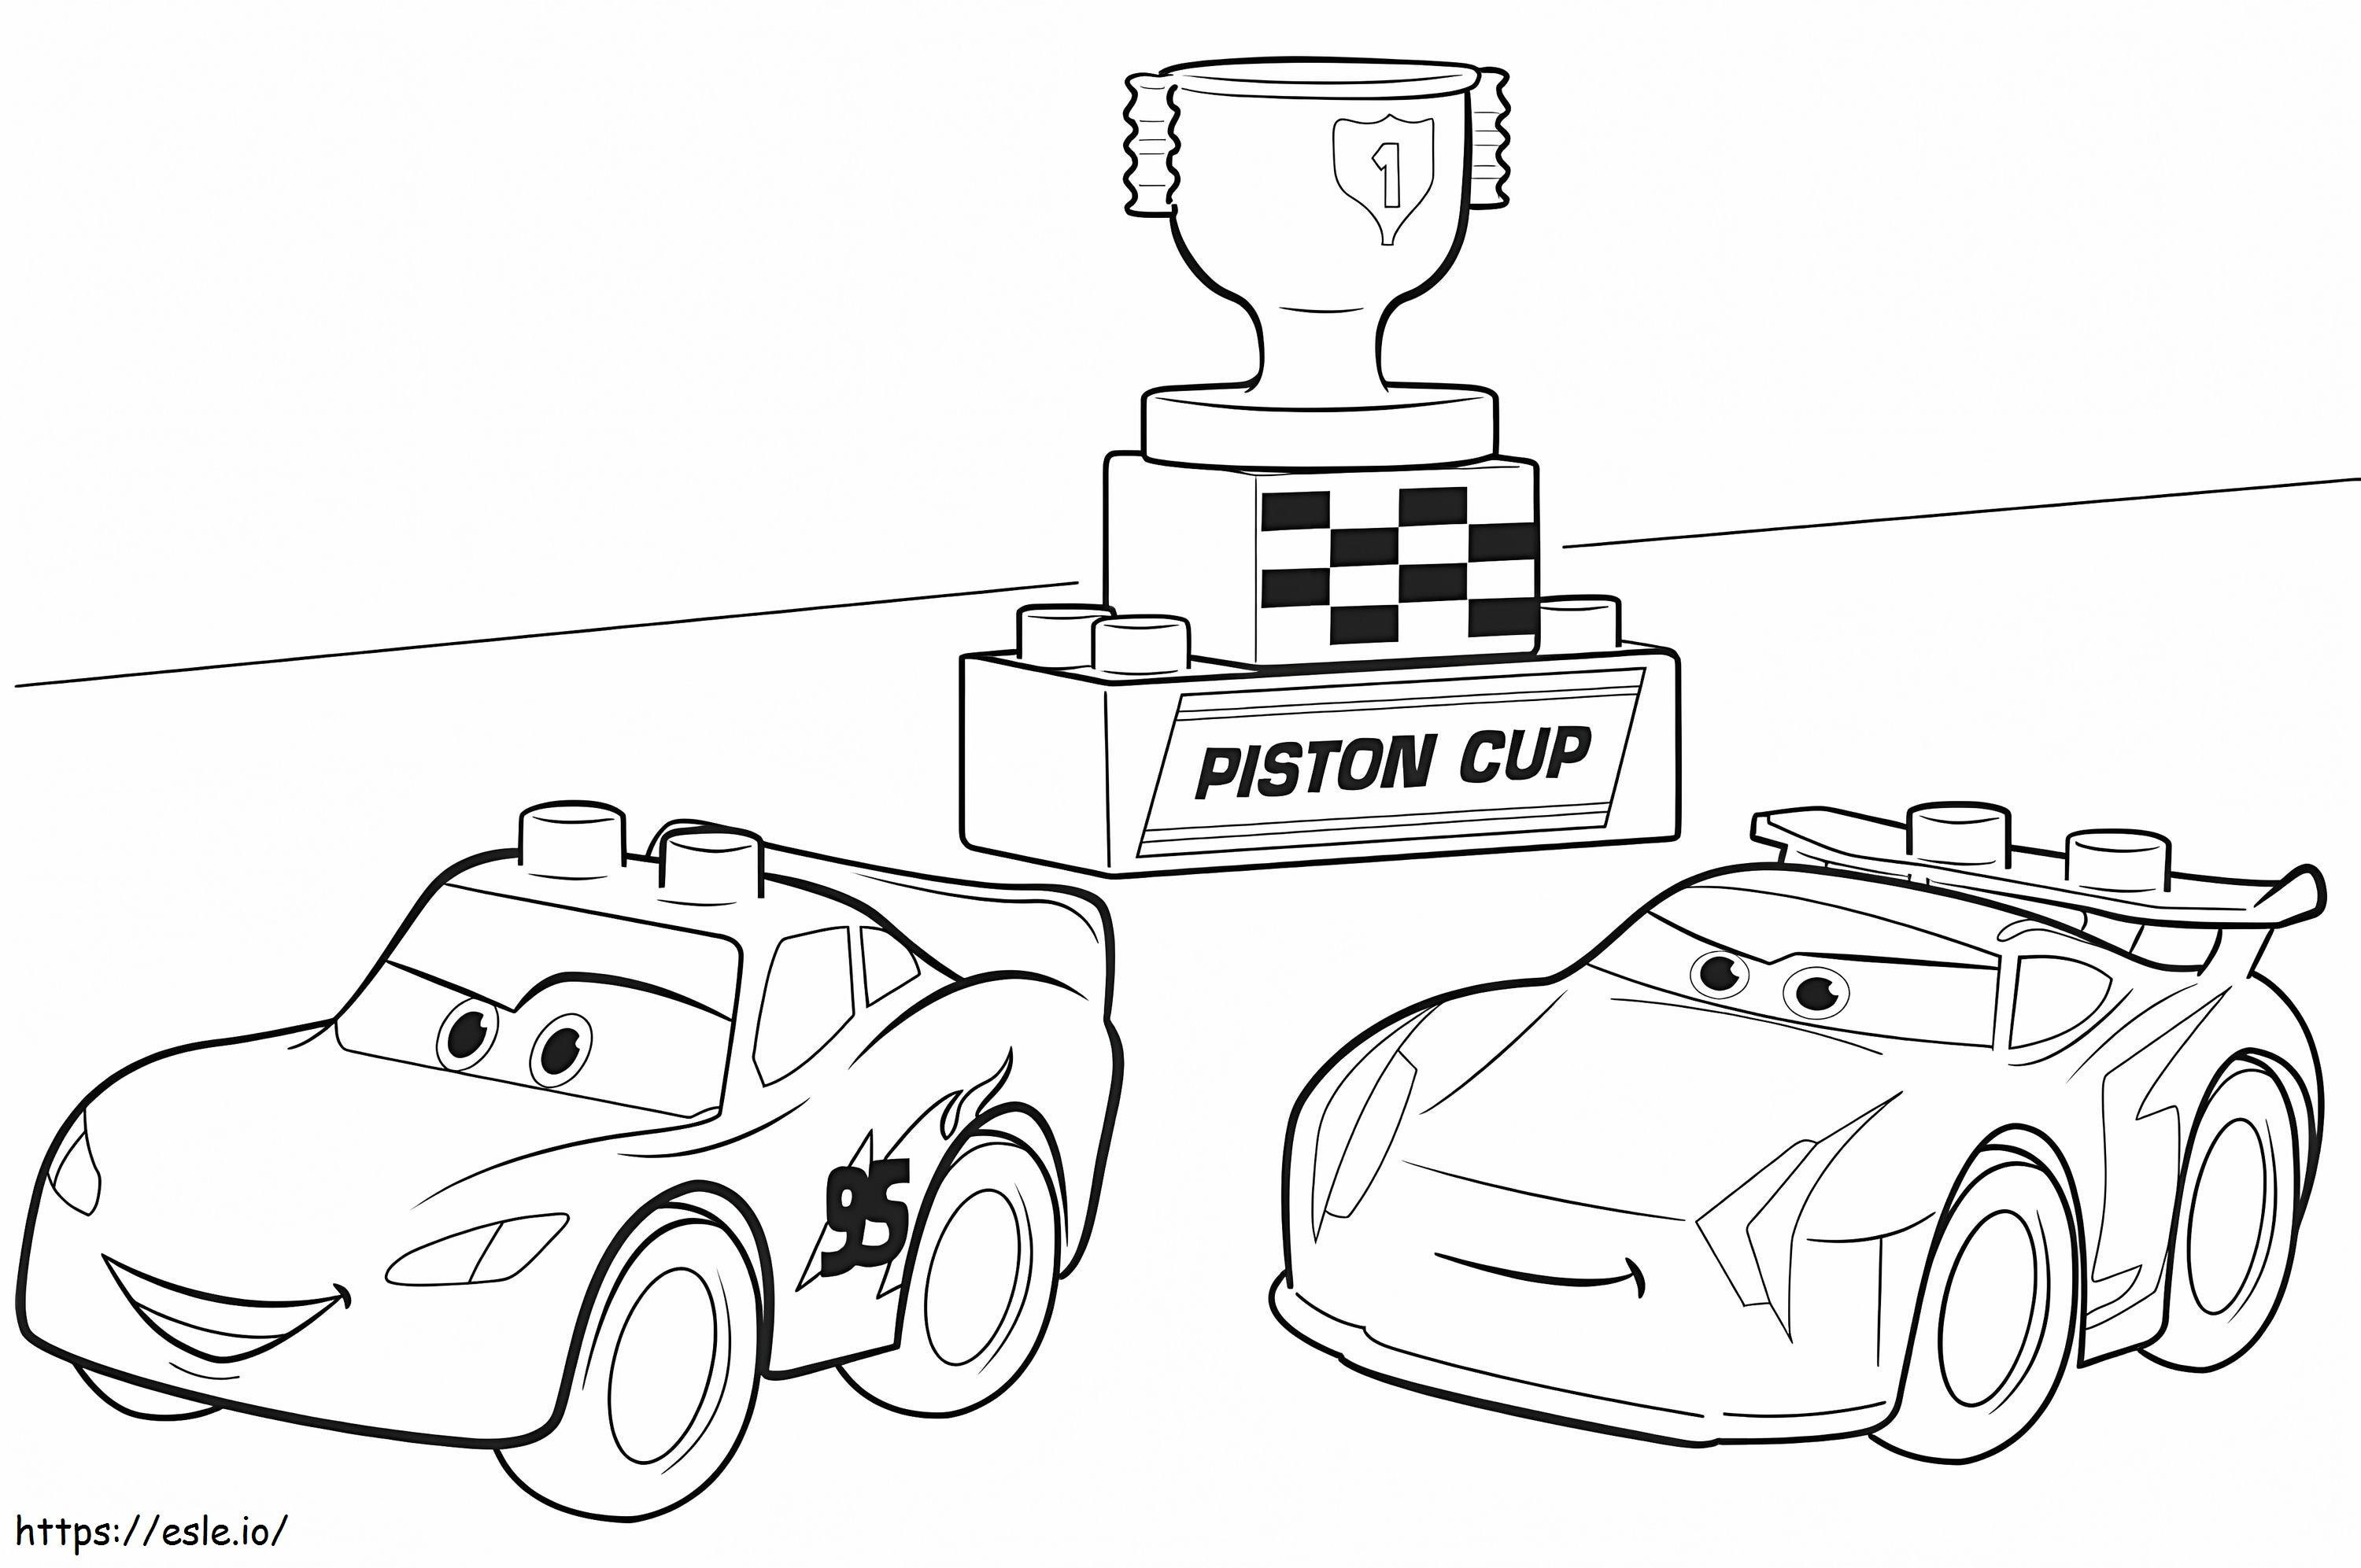 Cars 3 Lightning McQueen Lego Duplo coloring page